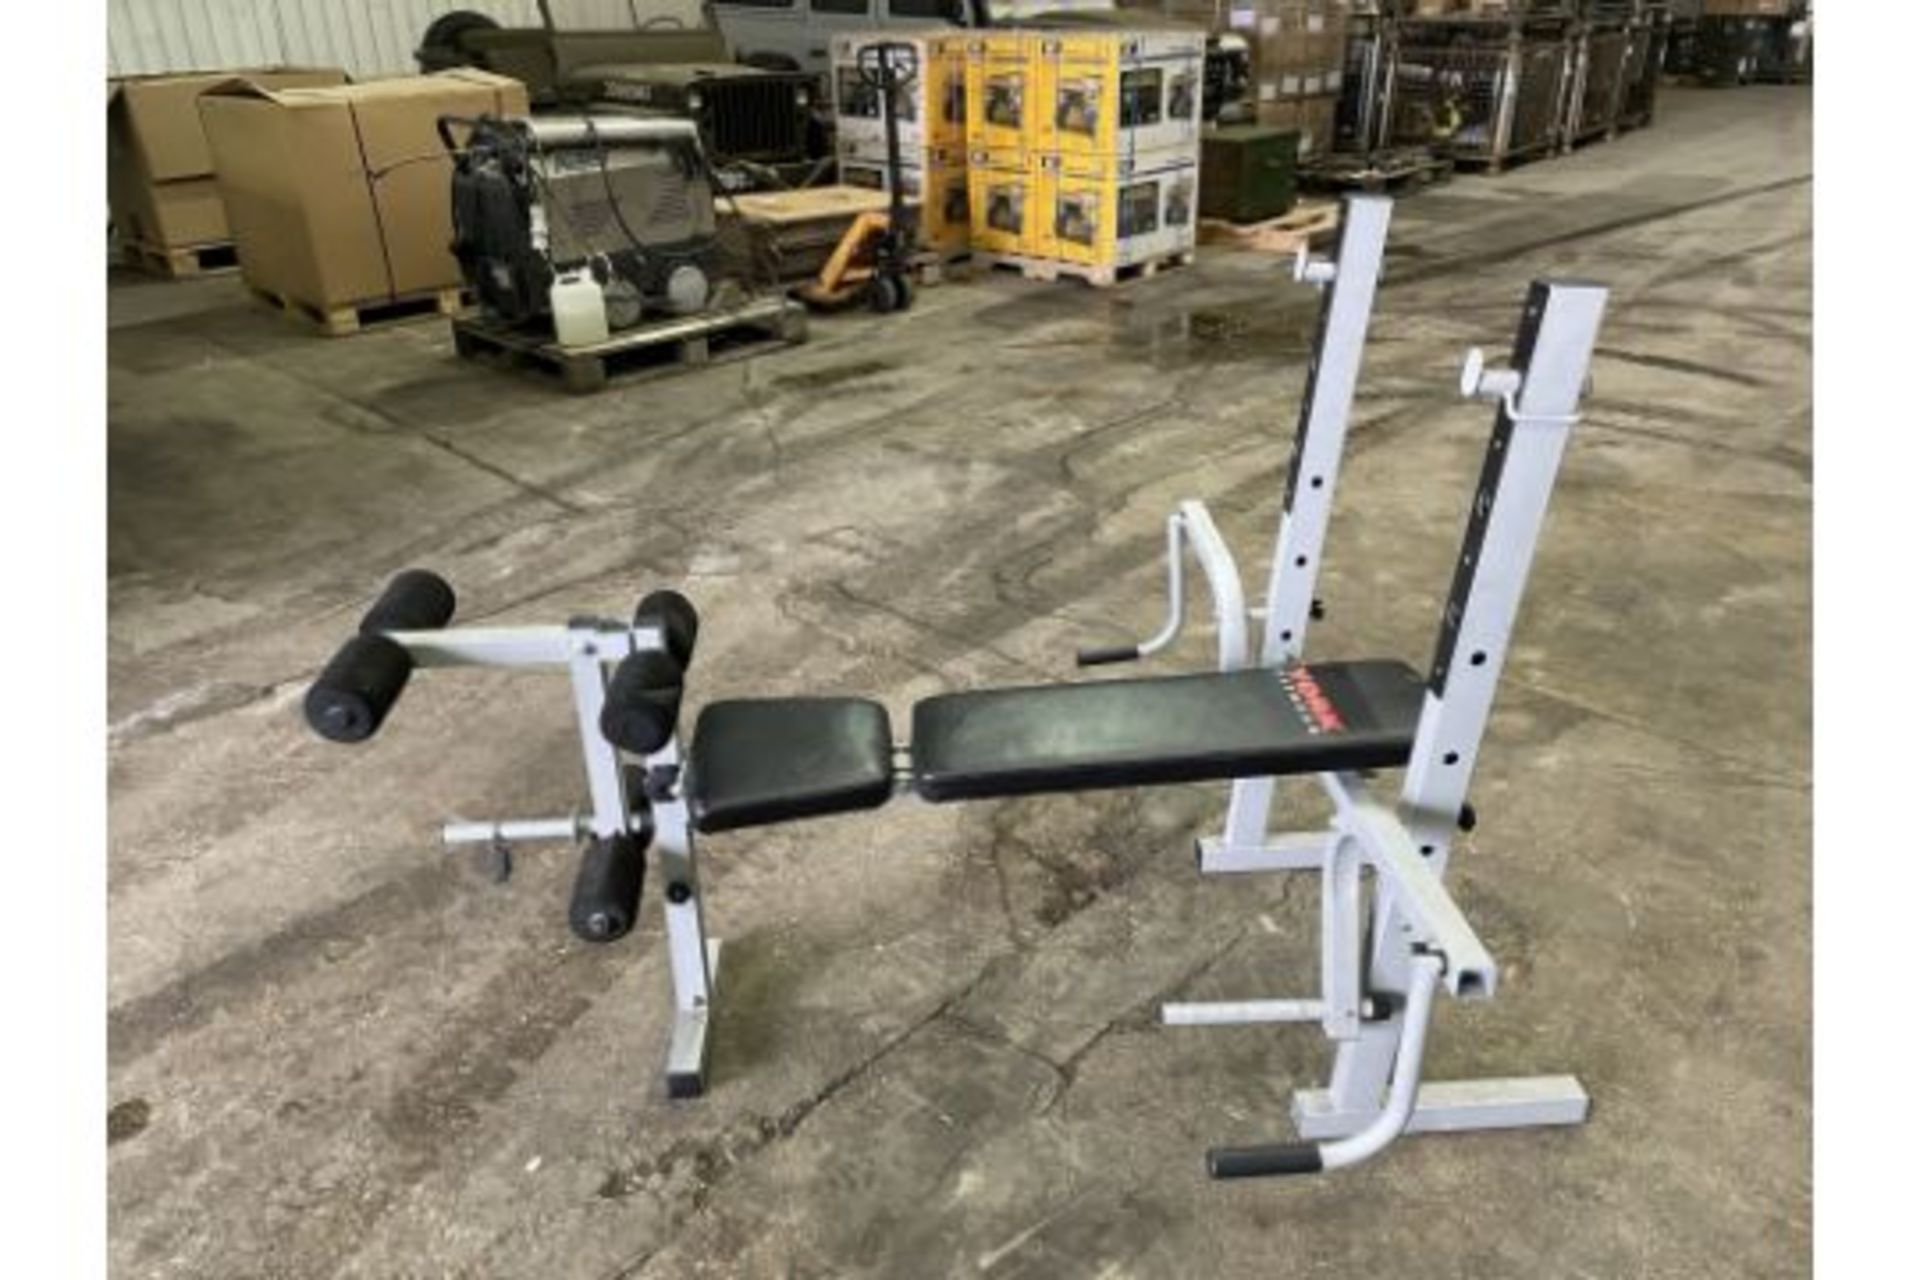 York Fitness Heavy Duty Multi-function Barbell Bench - Image 2 of 12